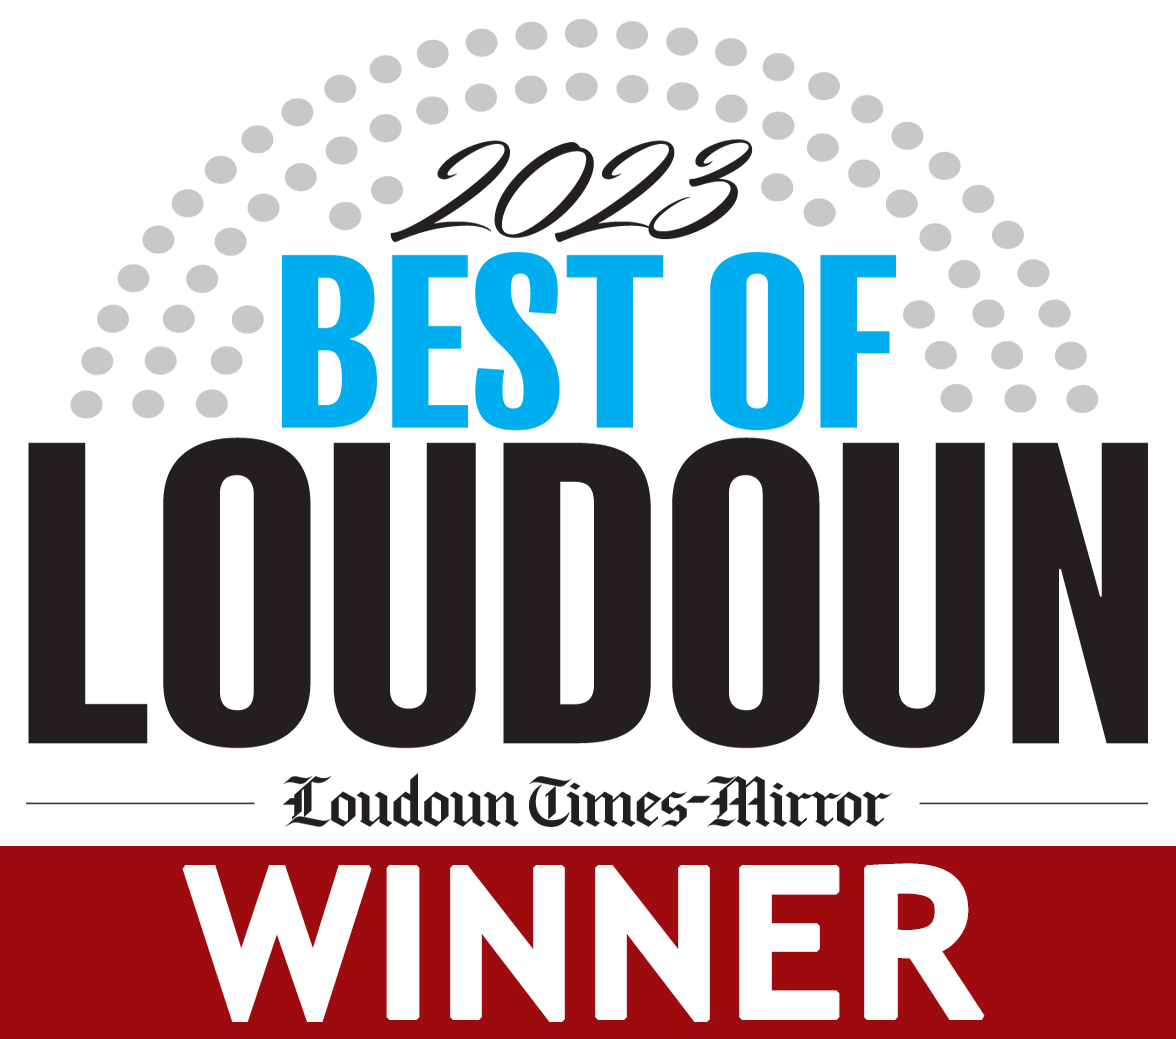 2023 BEST OF LOUDOUN WINNER AND FINALIST – Congratulations Fitwize! We are honored to have been voted Loudoun’s BEST GYMNASTICS CENTER and Finalist in our AFTER SCHOOL PROGRAM/TUTORING. Thanks to all who voted!

loudountimes.com/best/#//
#bestofloudoun #fitwize4kidsashburn